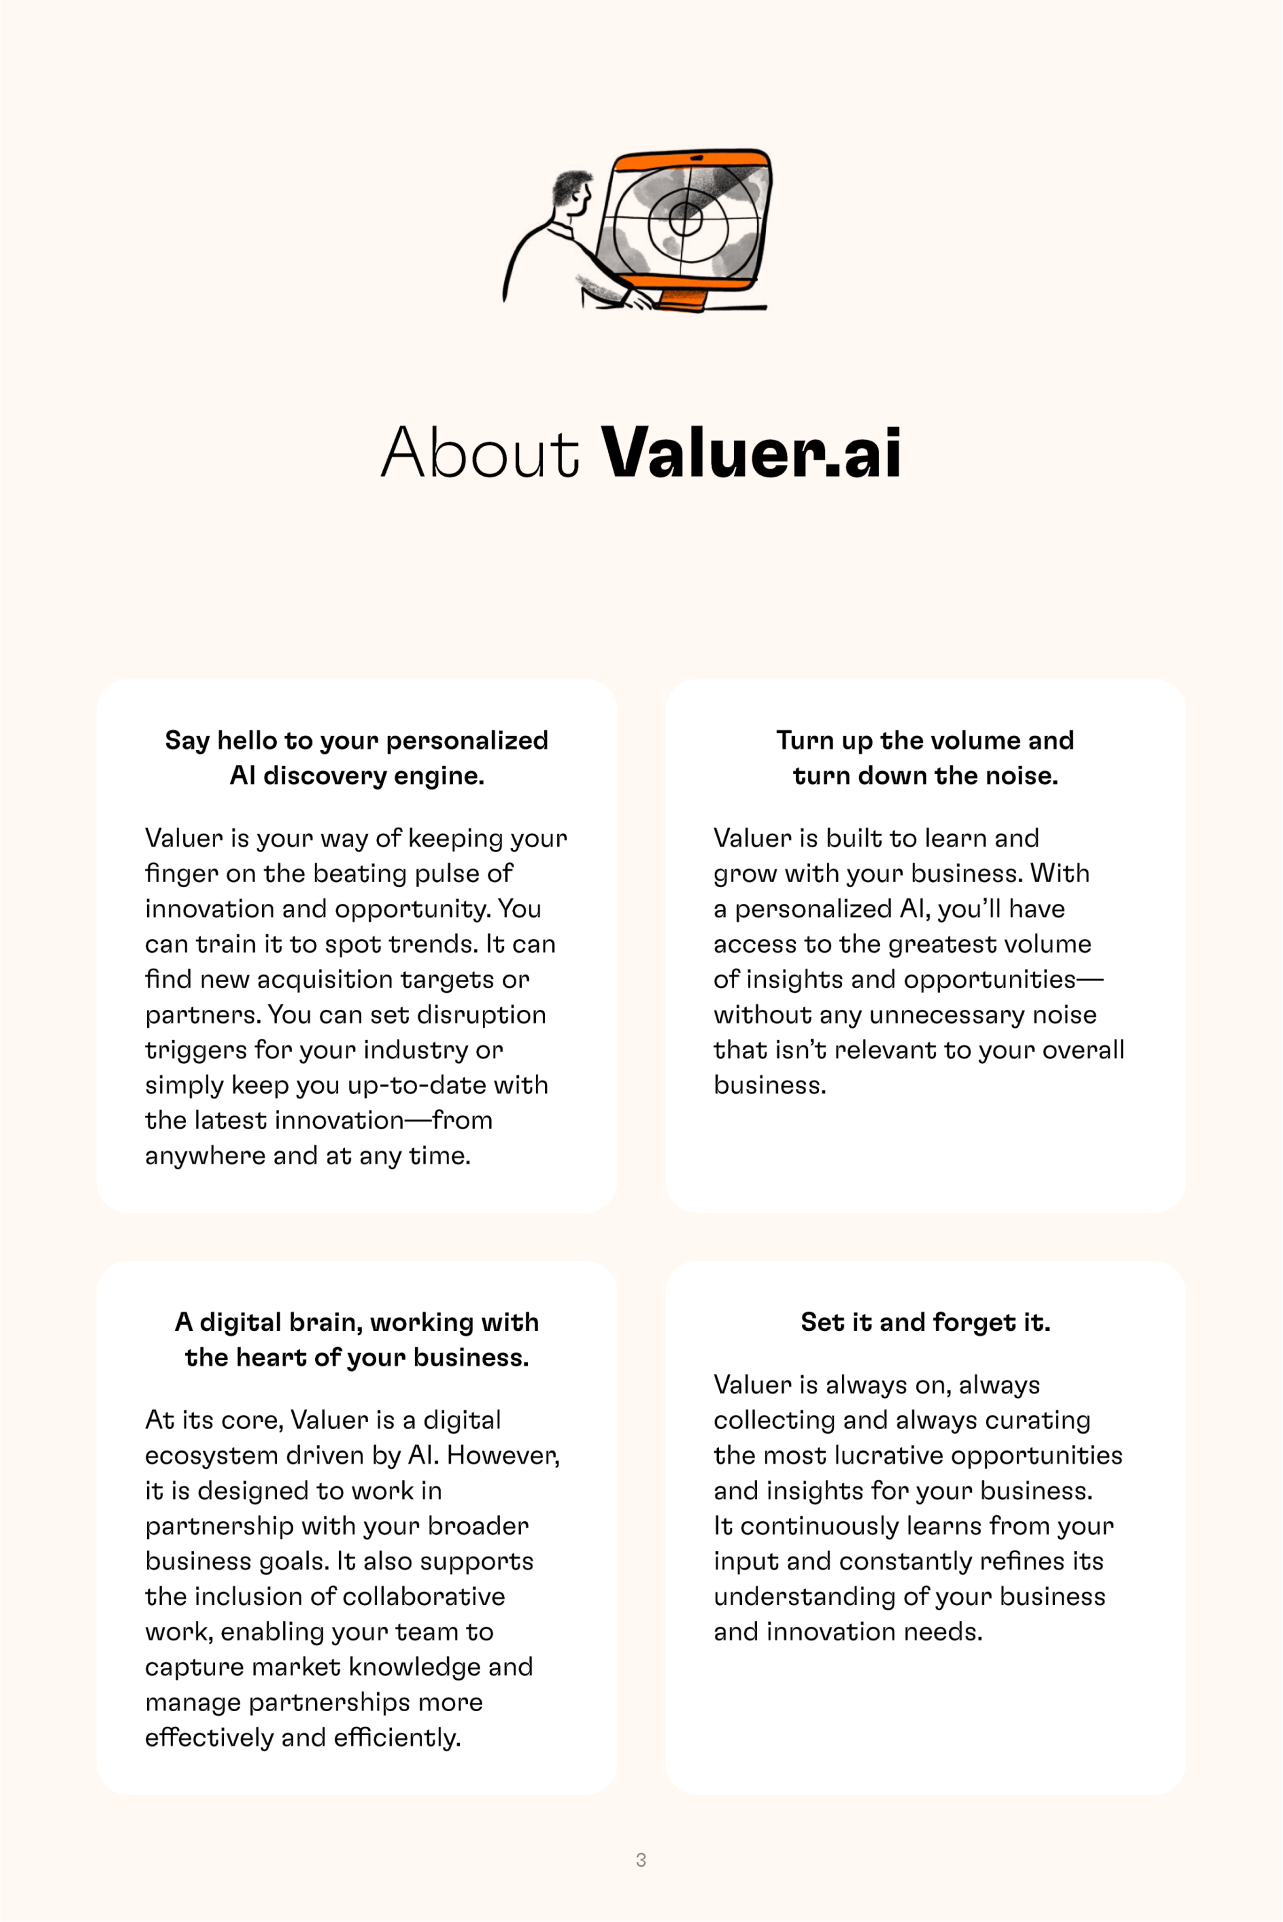 Retail Industry Insights about Valuer 